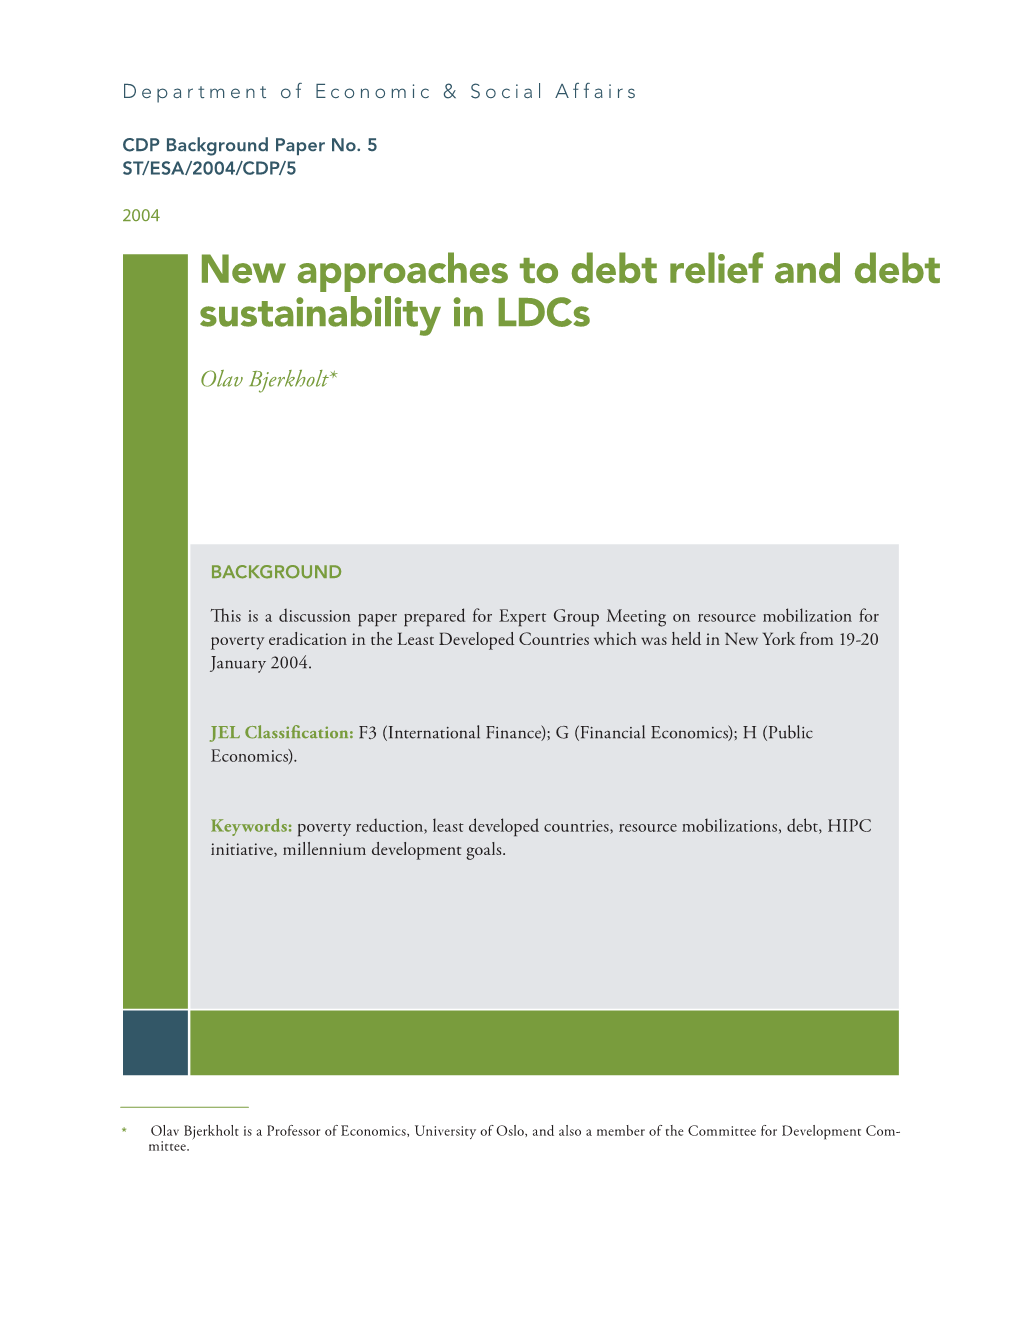 New Approaches to Debt Relief and Debt Sustainability in Ldcs